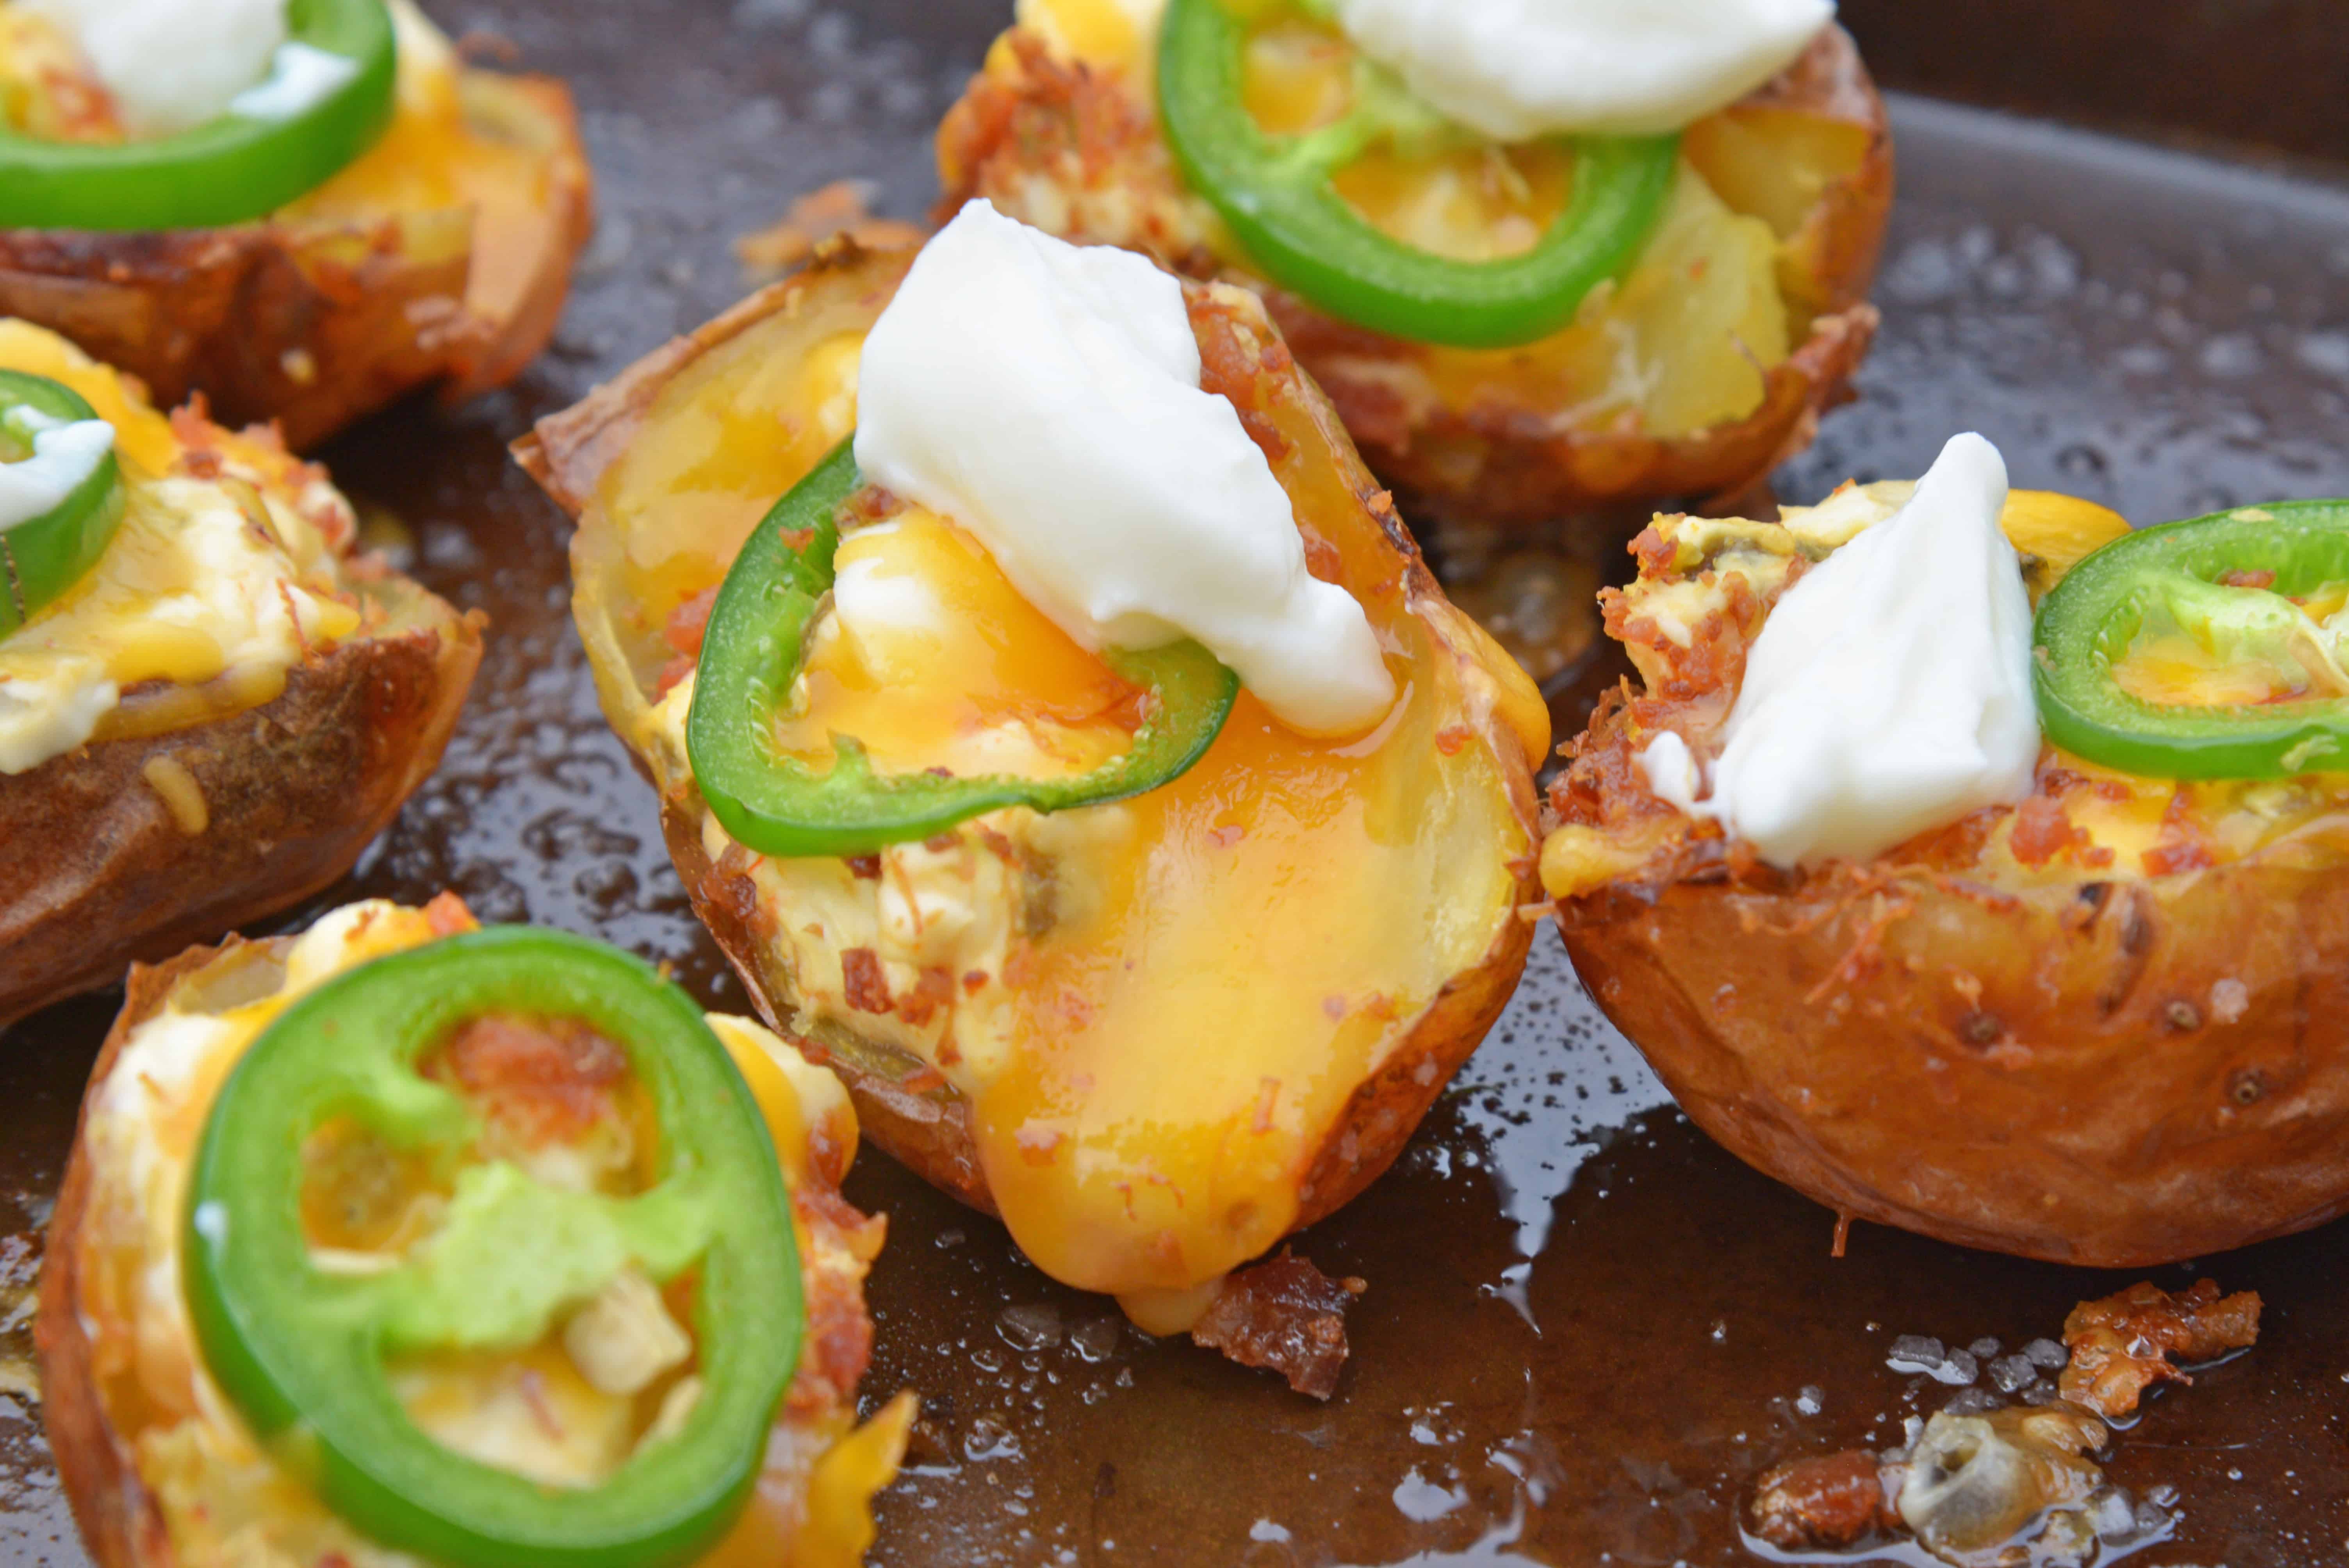 Jalapeno Popper Potato Skins are bite-sized potatoes filled with 3 types of cheese, fresh jalapenos, bacon and cooled off with sour cream. Perfect for a snack or party appetizer! #potatoskins #jalapenopoppers www.savoryexperiments.com